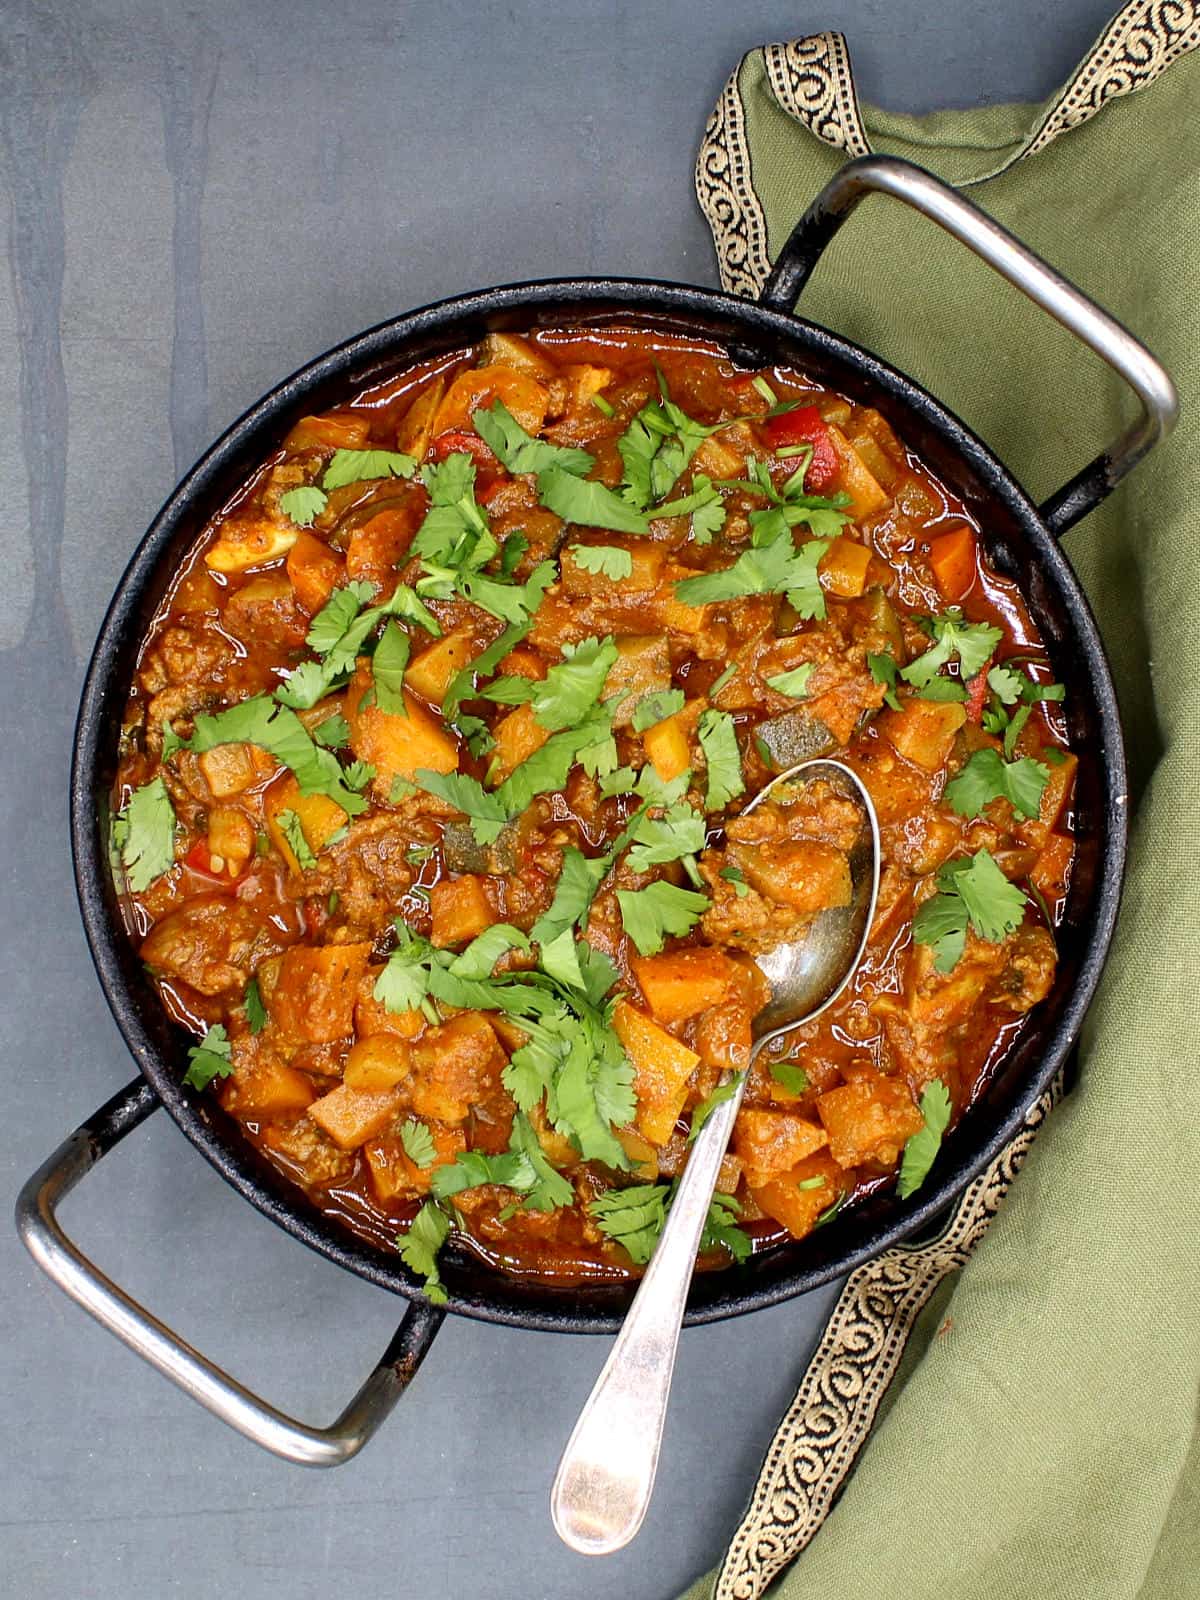 Indian curry with veggies and meat in karahi with spoon.